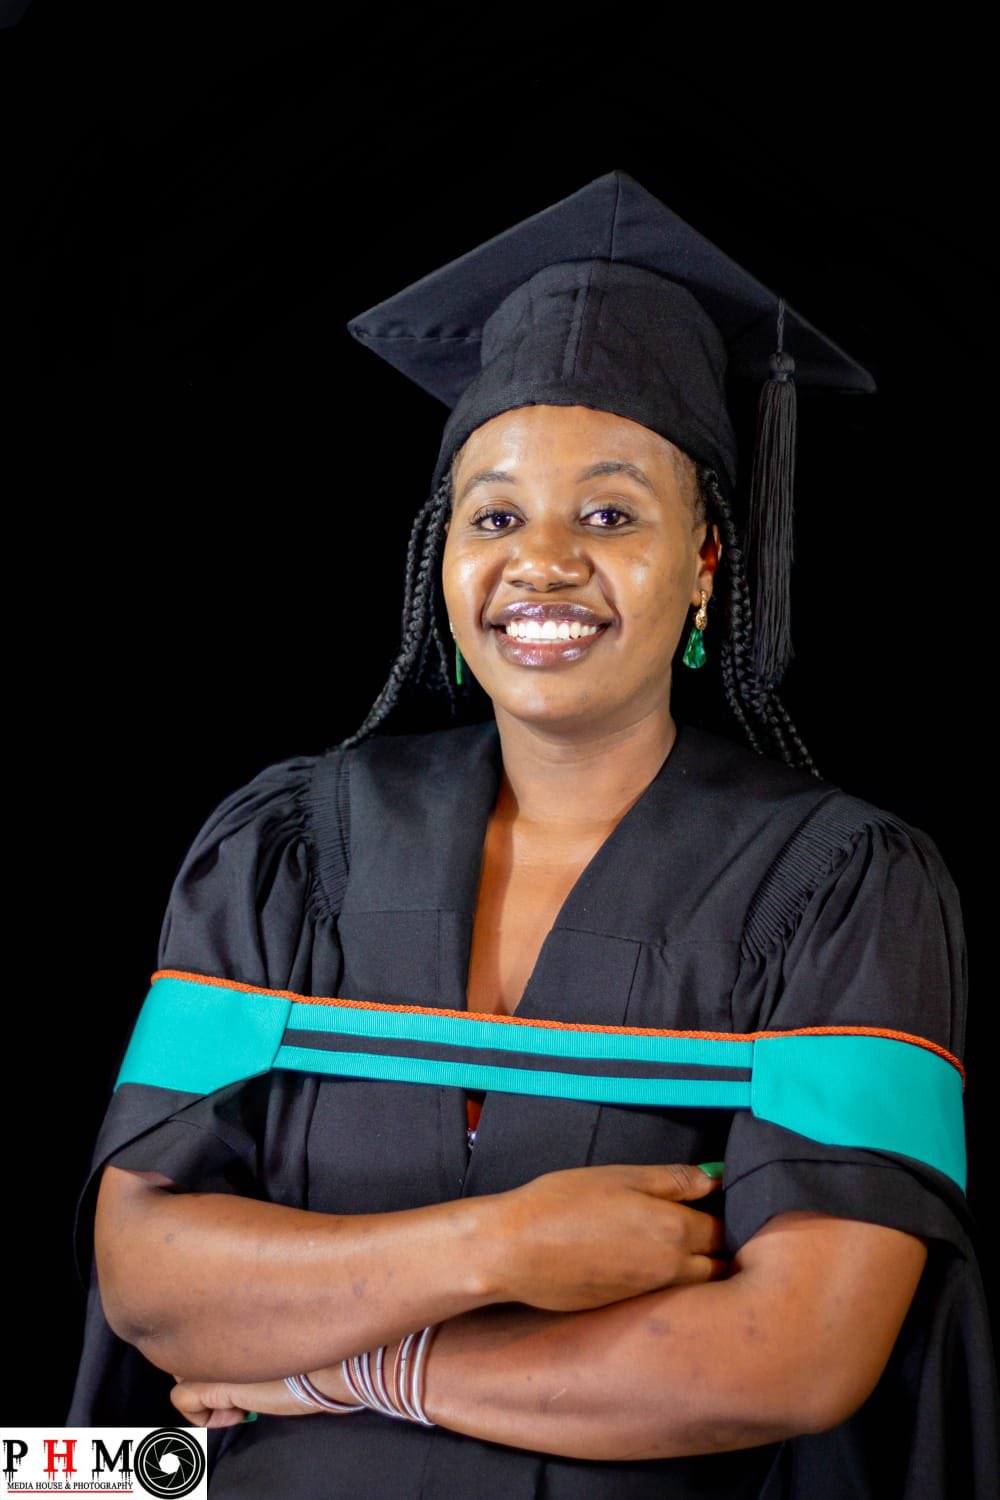 Grad Young Black Girl In A Graduation Gown Backgrounds | JPG Free Download  - Pikbest